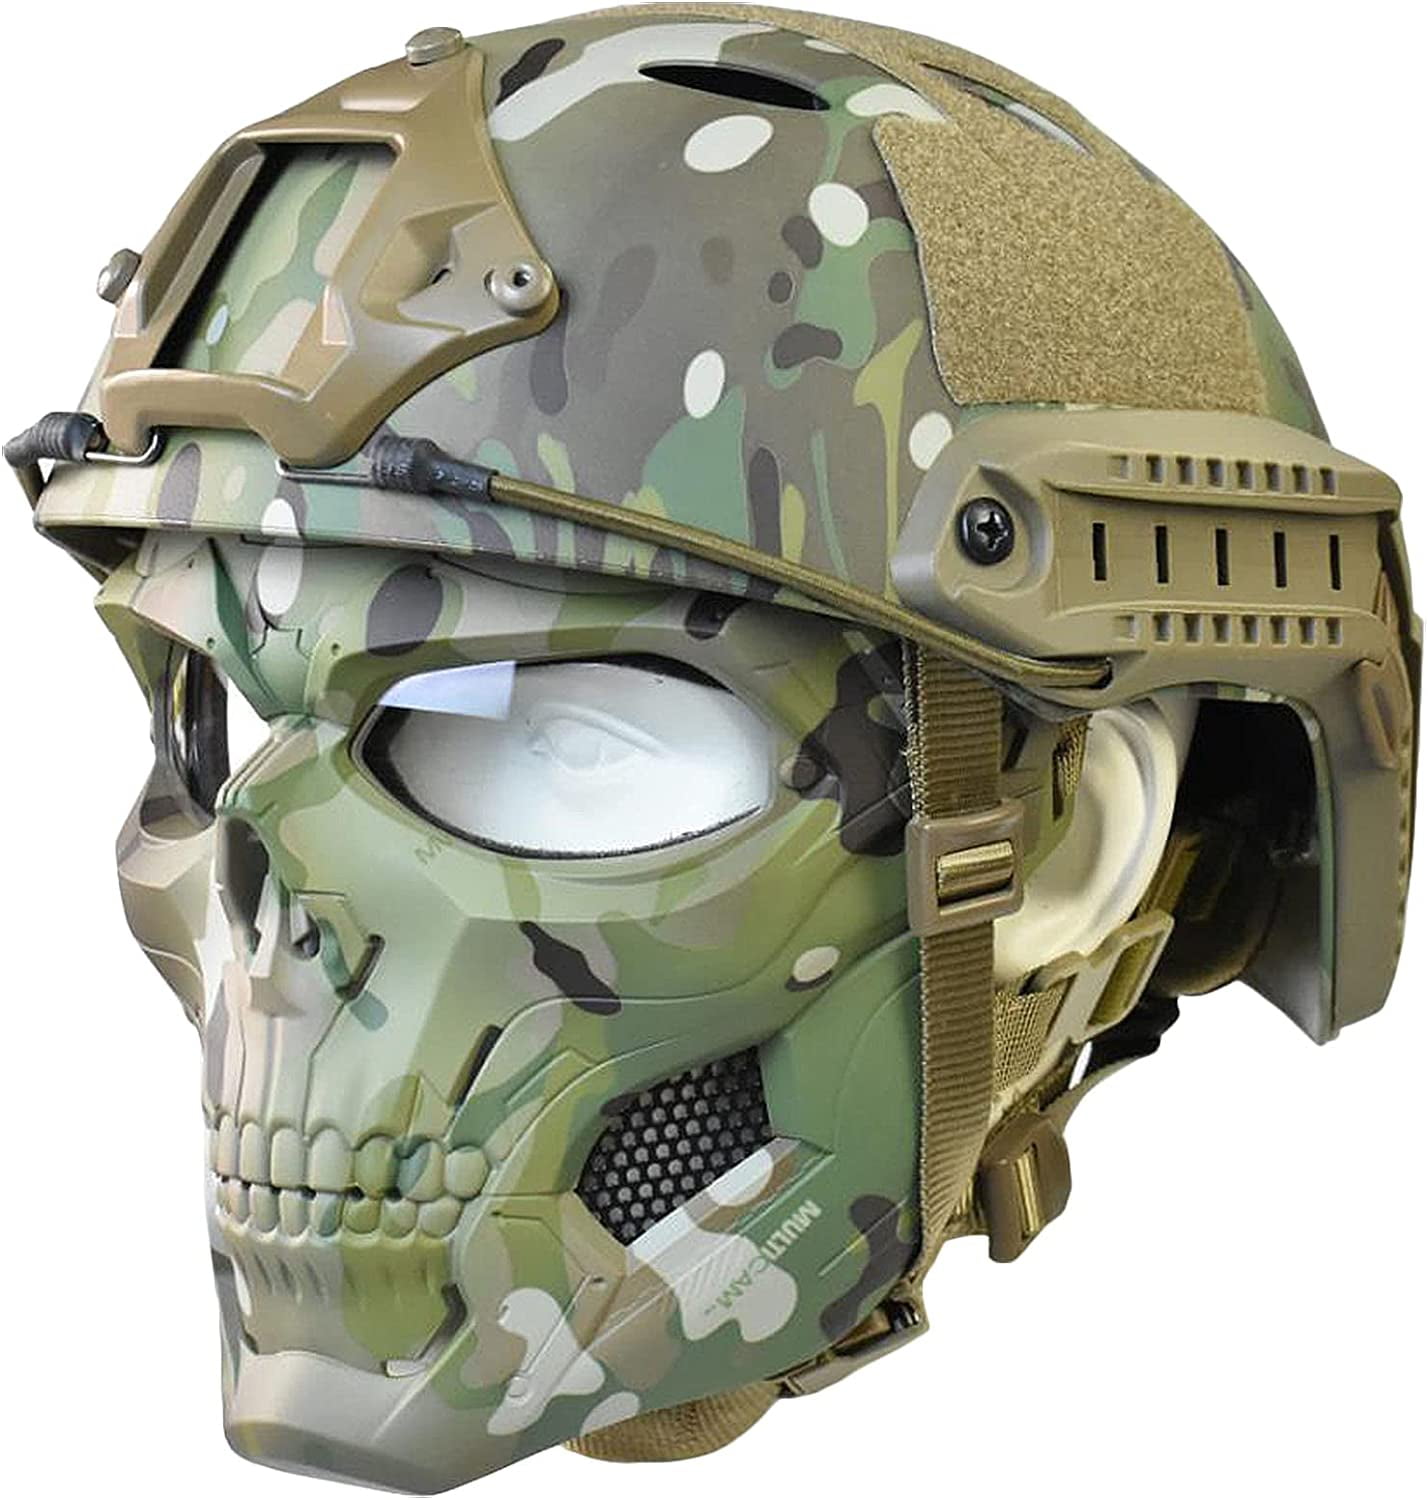 Anyoupin Tactical Helmet,Fast PJ Type Paintball Airsoft Military Helmet 